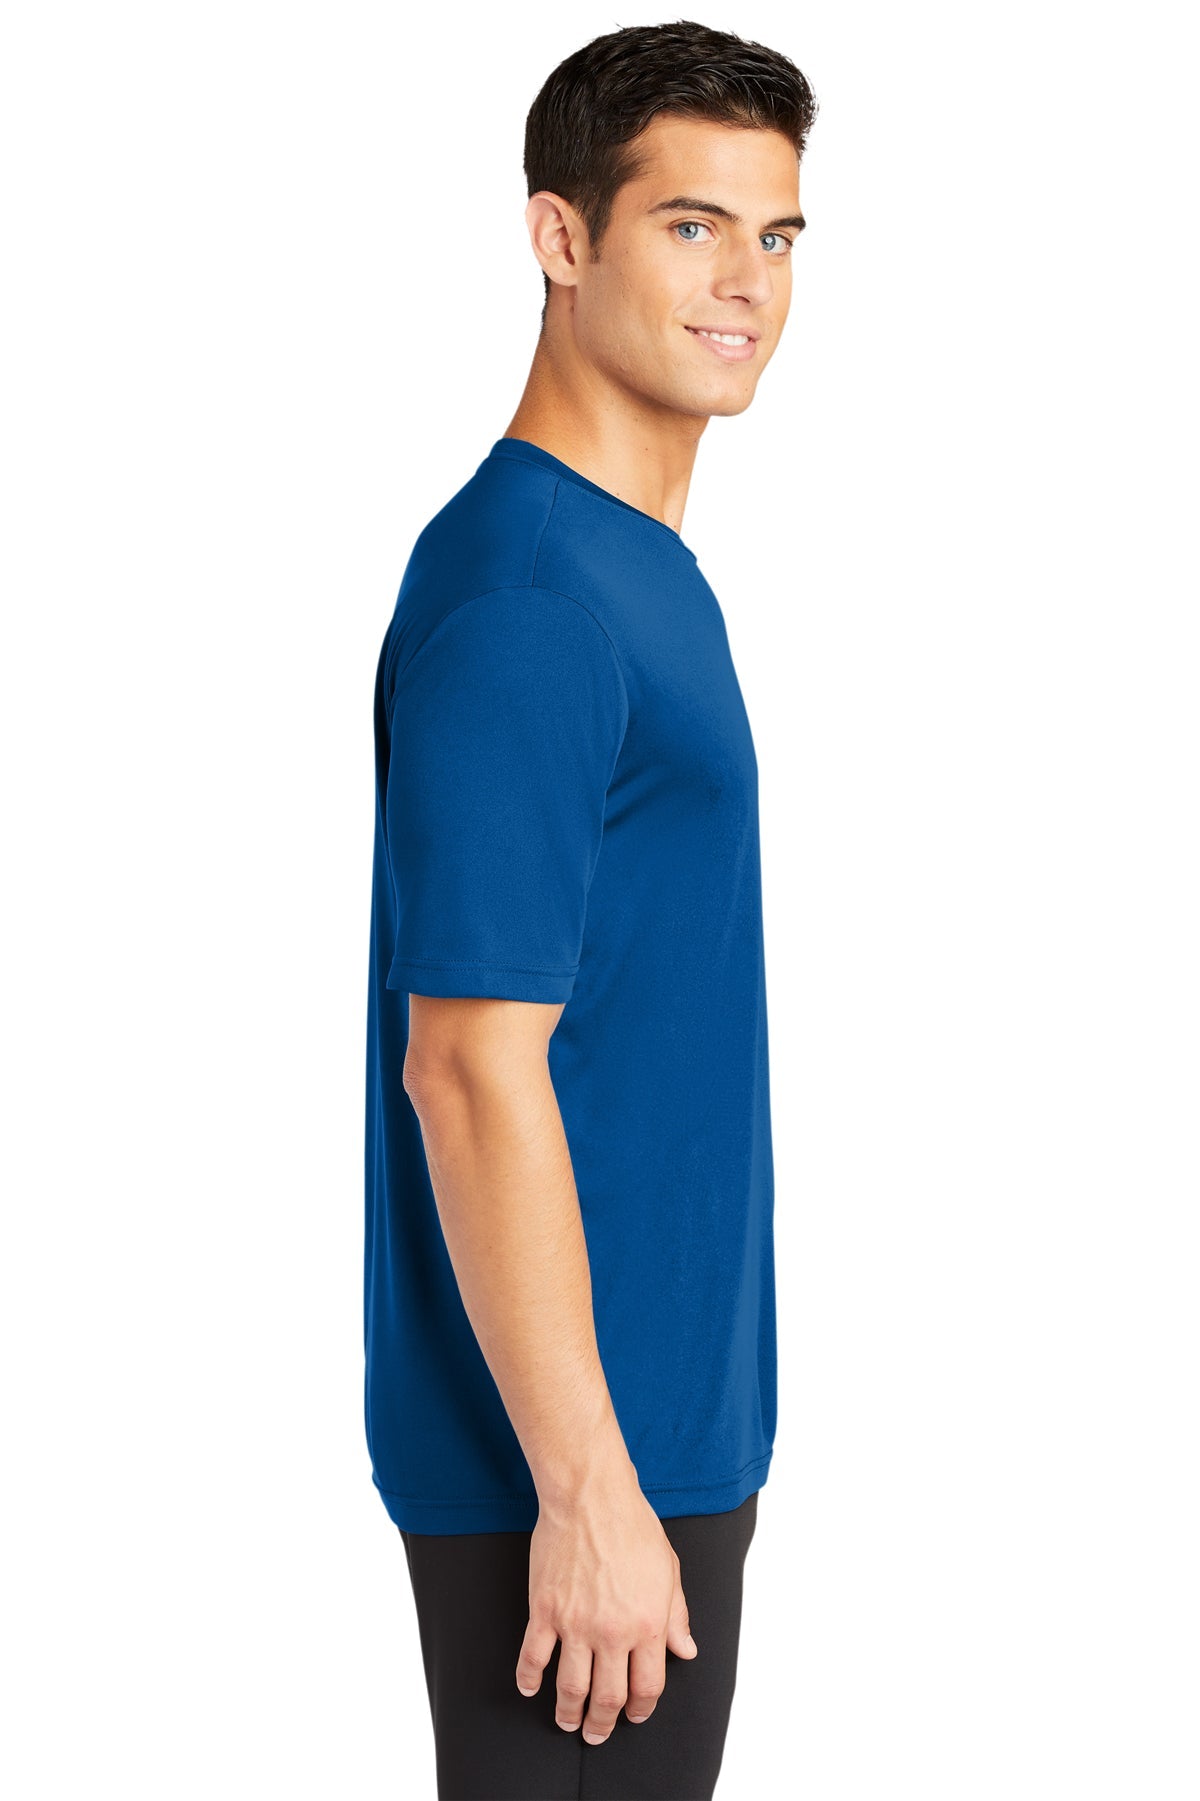 Sport-Tek Tall PosiCharge Branded Competitor Tee's, True Royal